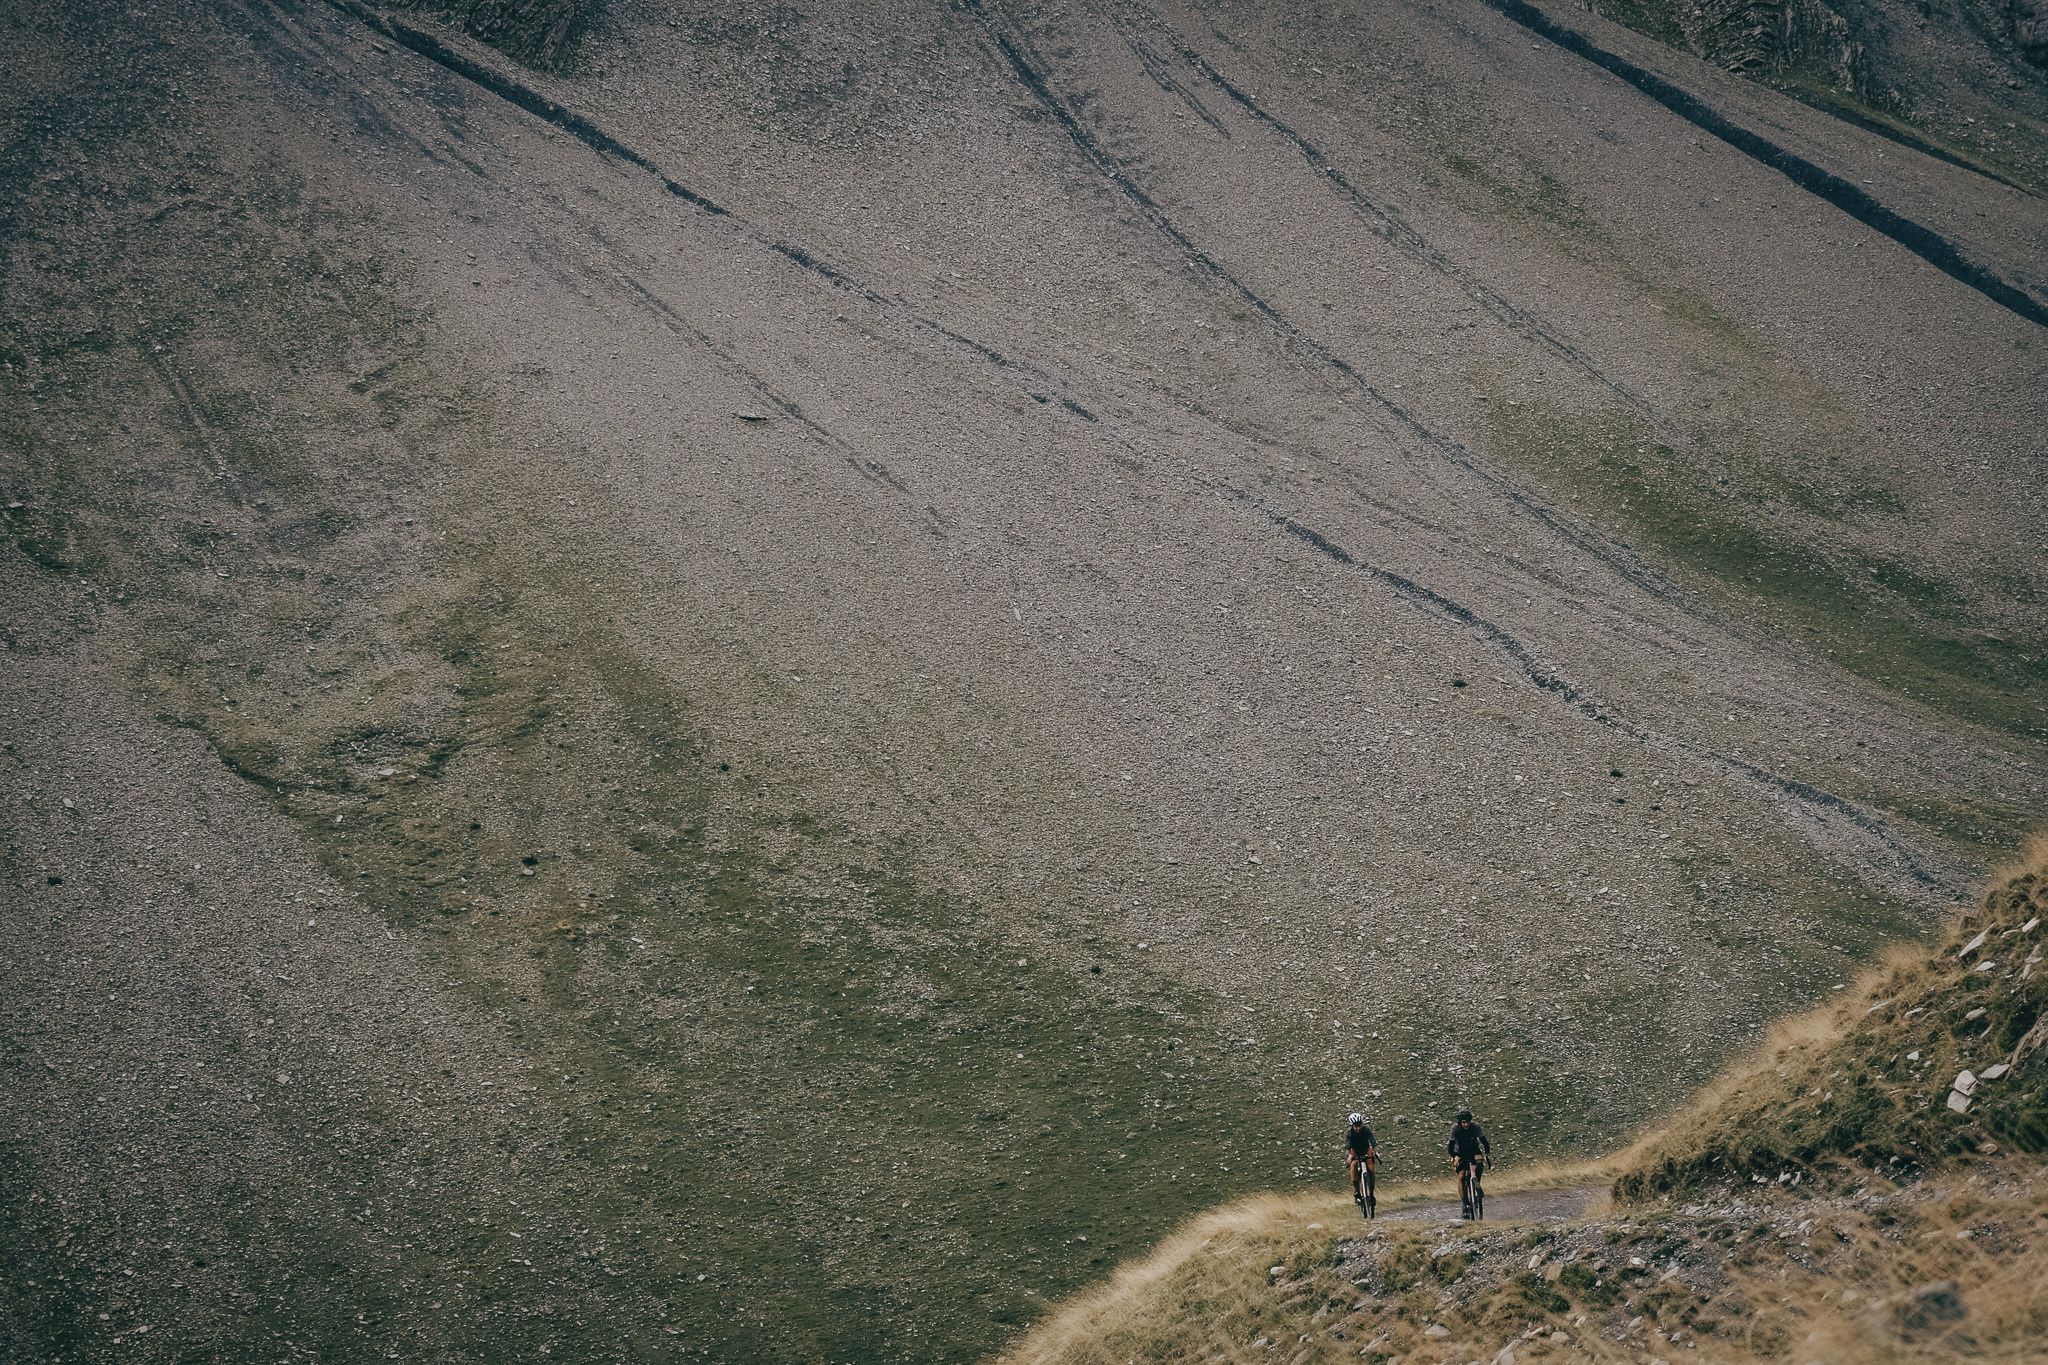 The landscapes in the french alps are stunning and perfect for gravel cycling.